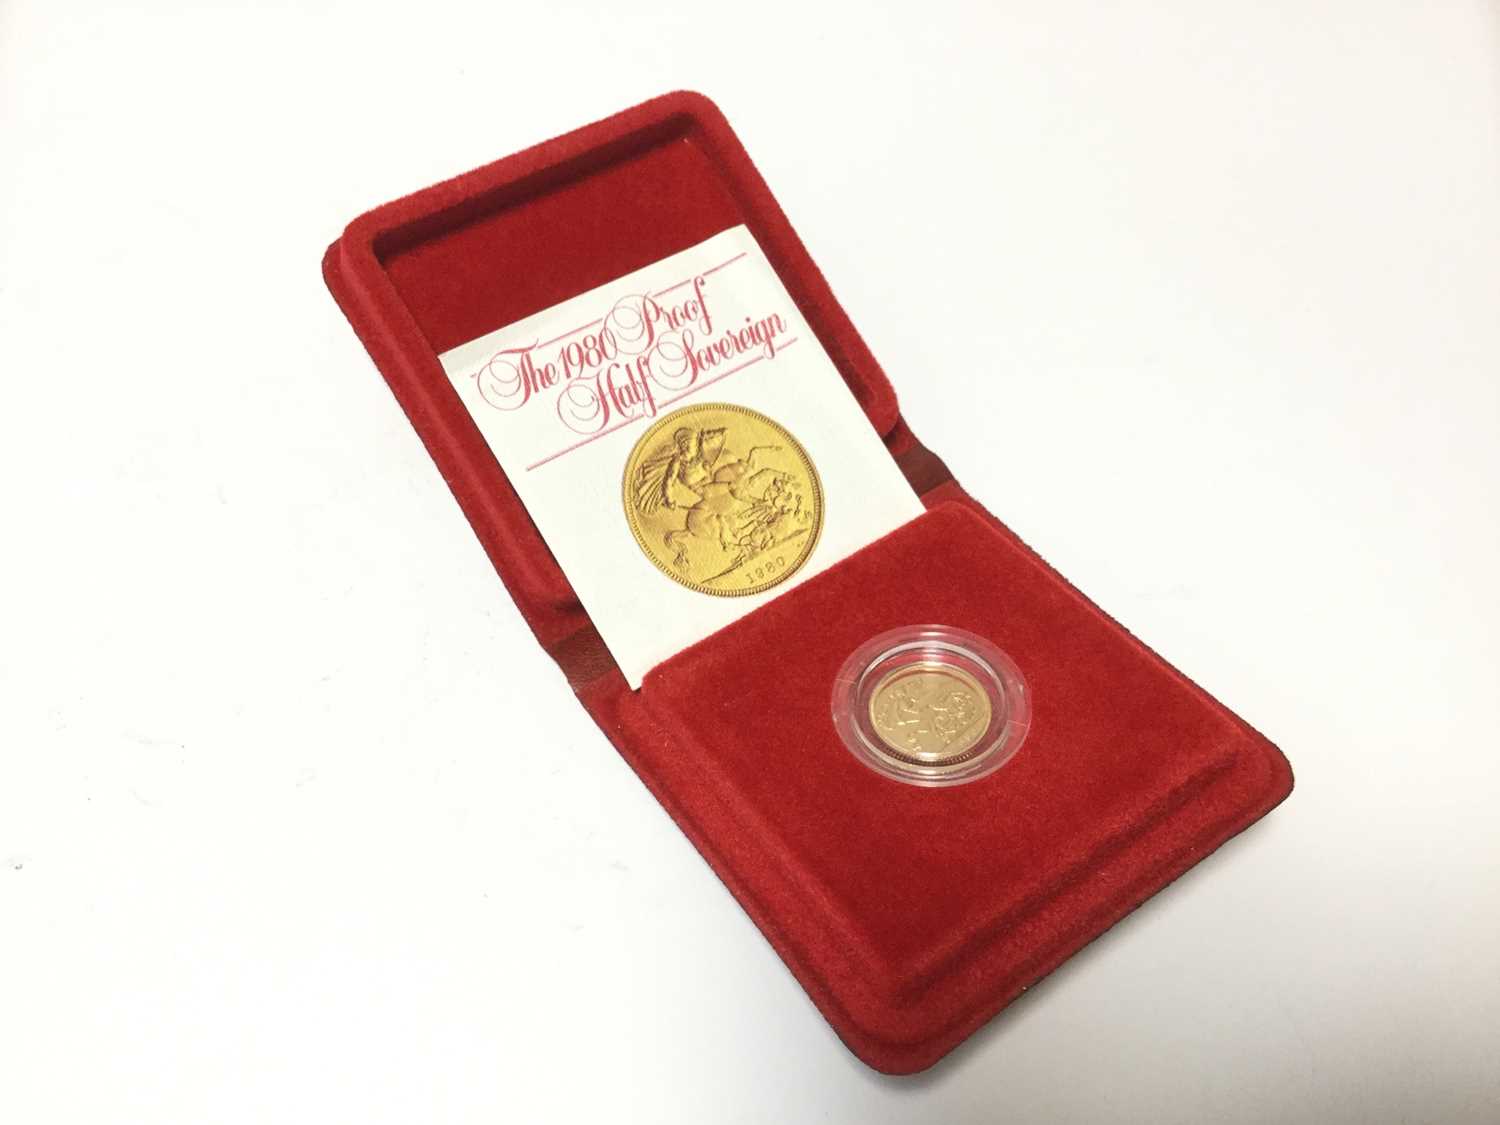 Lot 430 - G.B. - Royal Mint gold proof Half Sovereign Elizabeth II 1980 (N.B. In case of issue with Certificate of Authenticity) (1 coin)